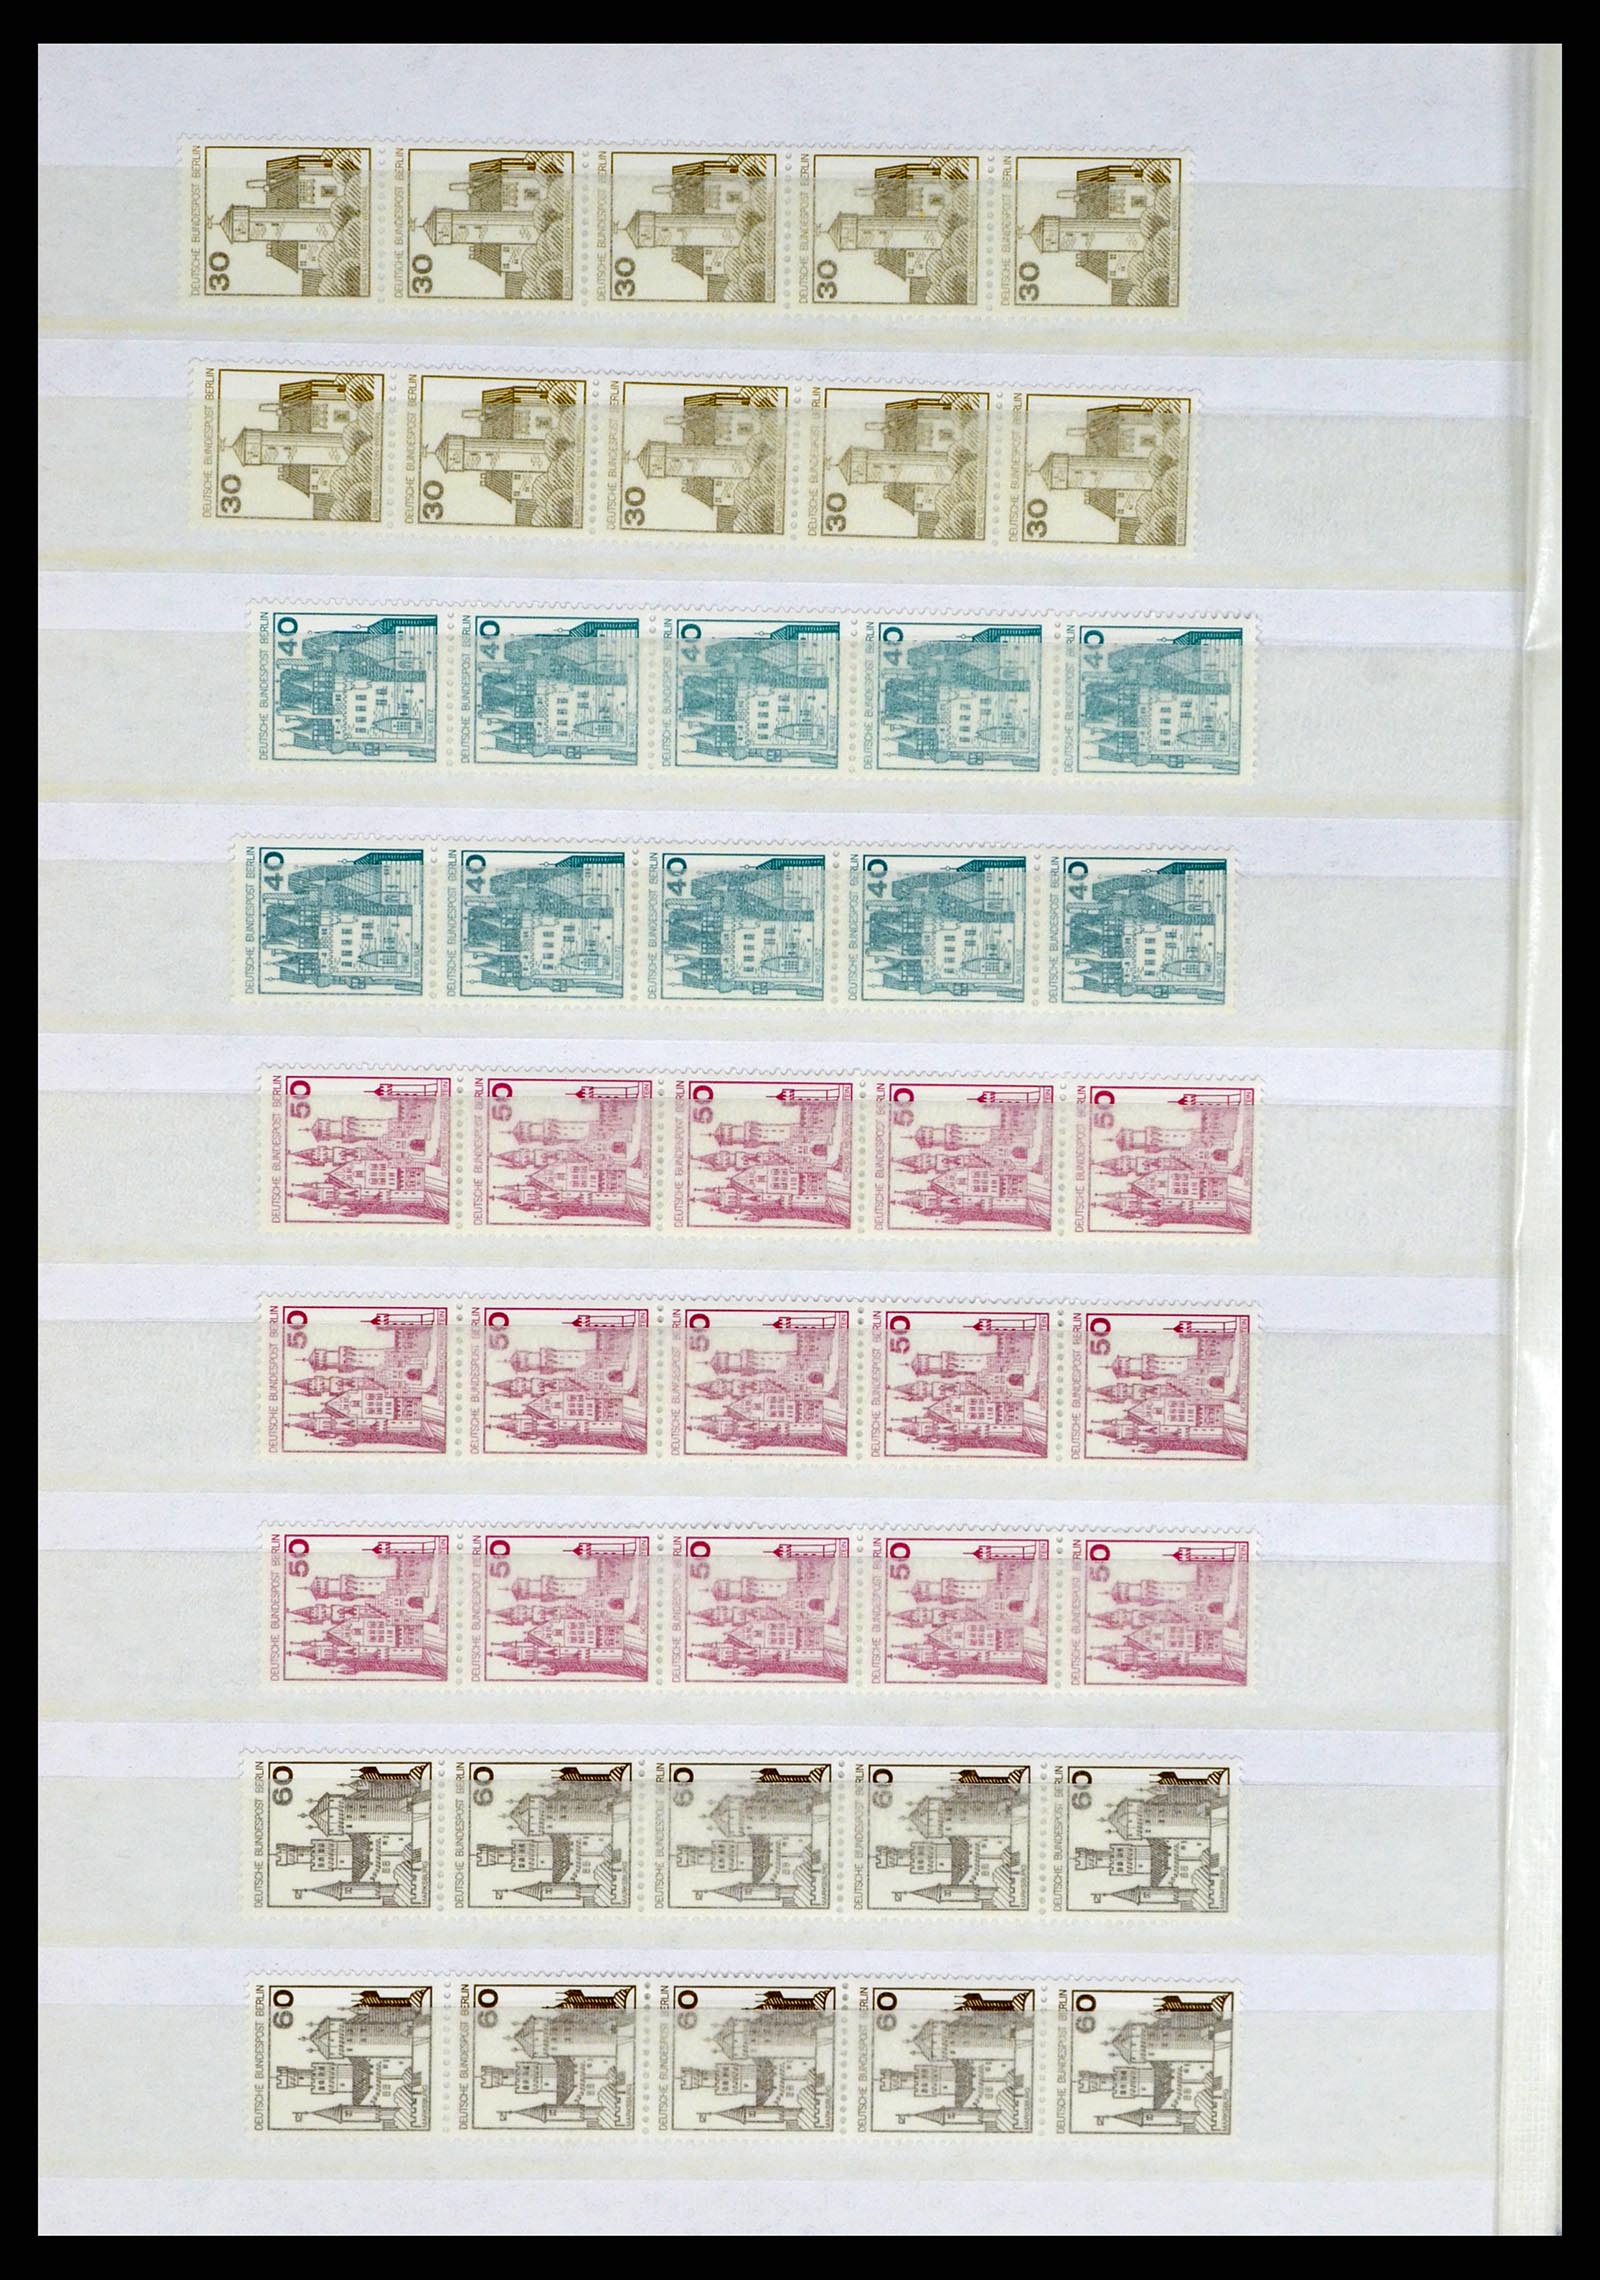 37354 093 - Stamp collection 37354 Bundespost and Berlin 1955-2000.